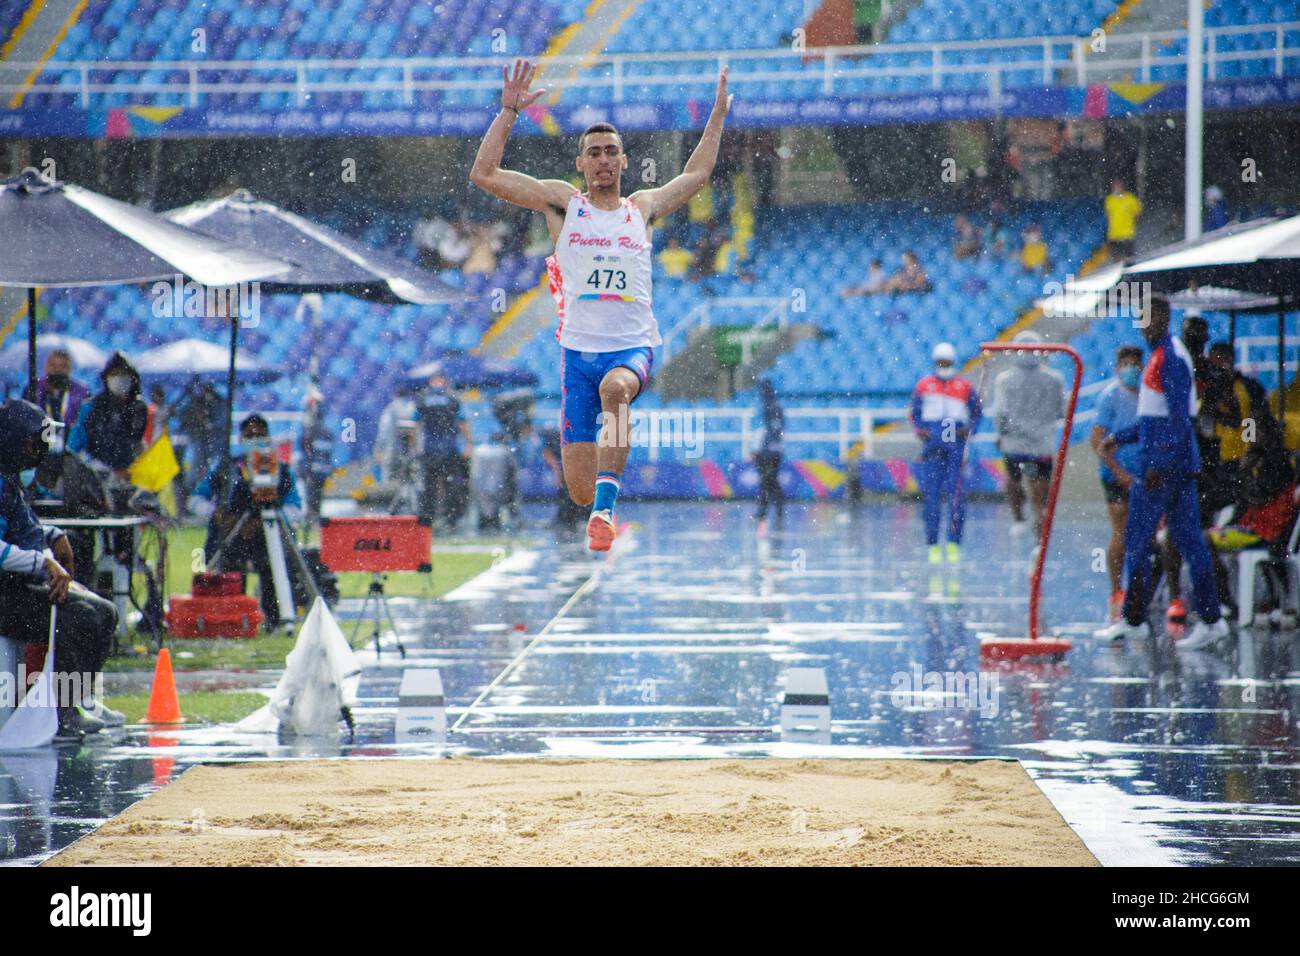 Shawn Alexander Diaz Torres from Puerto Rico Athletism team participates during the 2021 Junior Pan American Sport Games in Cali, Valle del Cauca, Colombia on December, 1 2021 Stock Photo